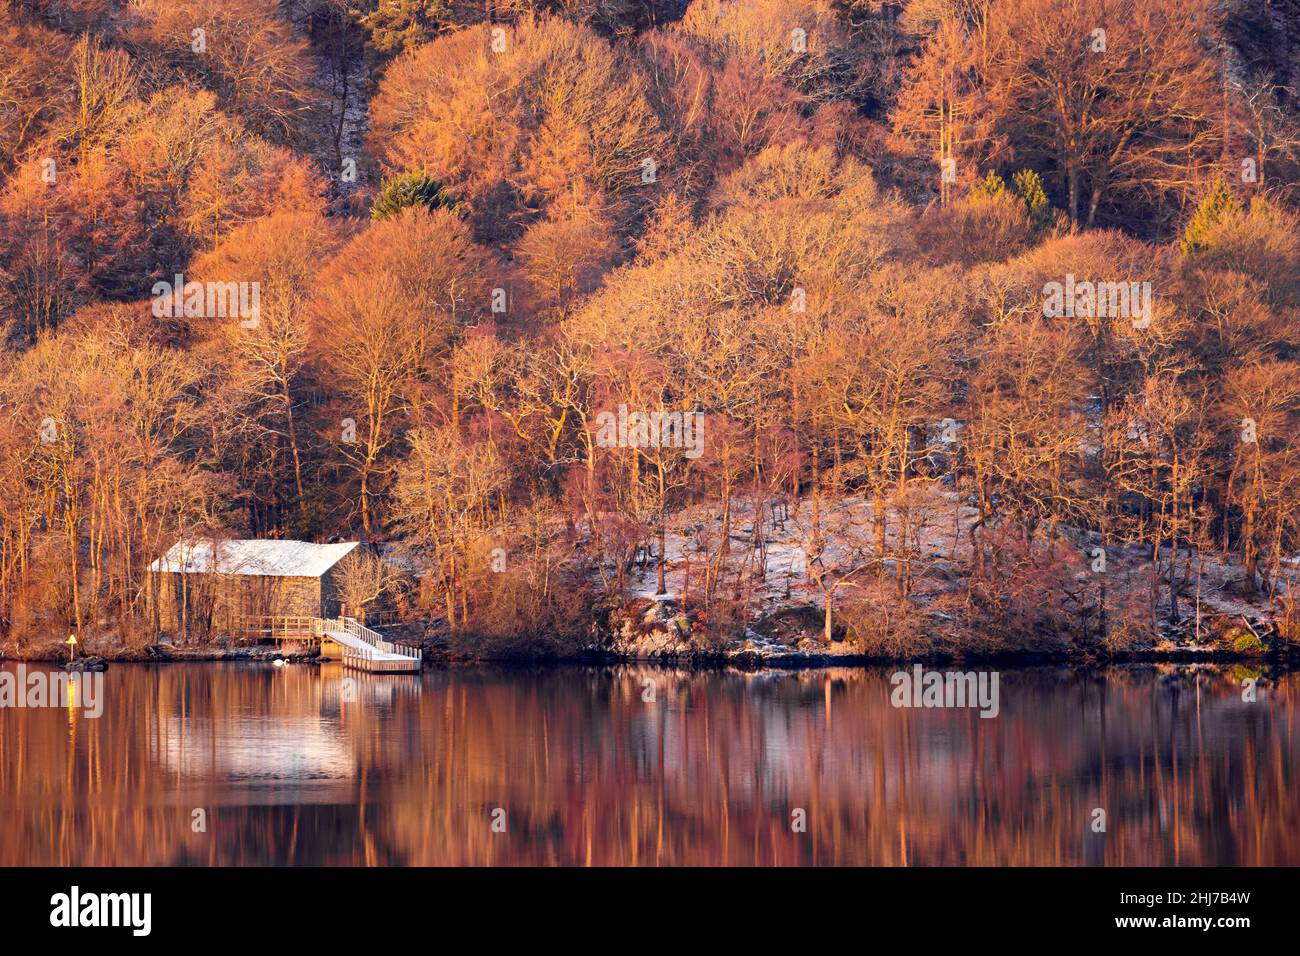 A boathouse on Windermere, with its reflection in the water, seen from Queen Adelaide's Hill Stock Photo